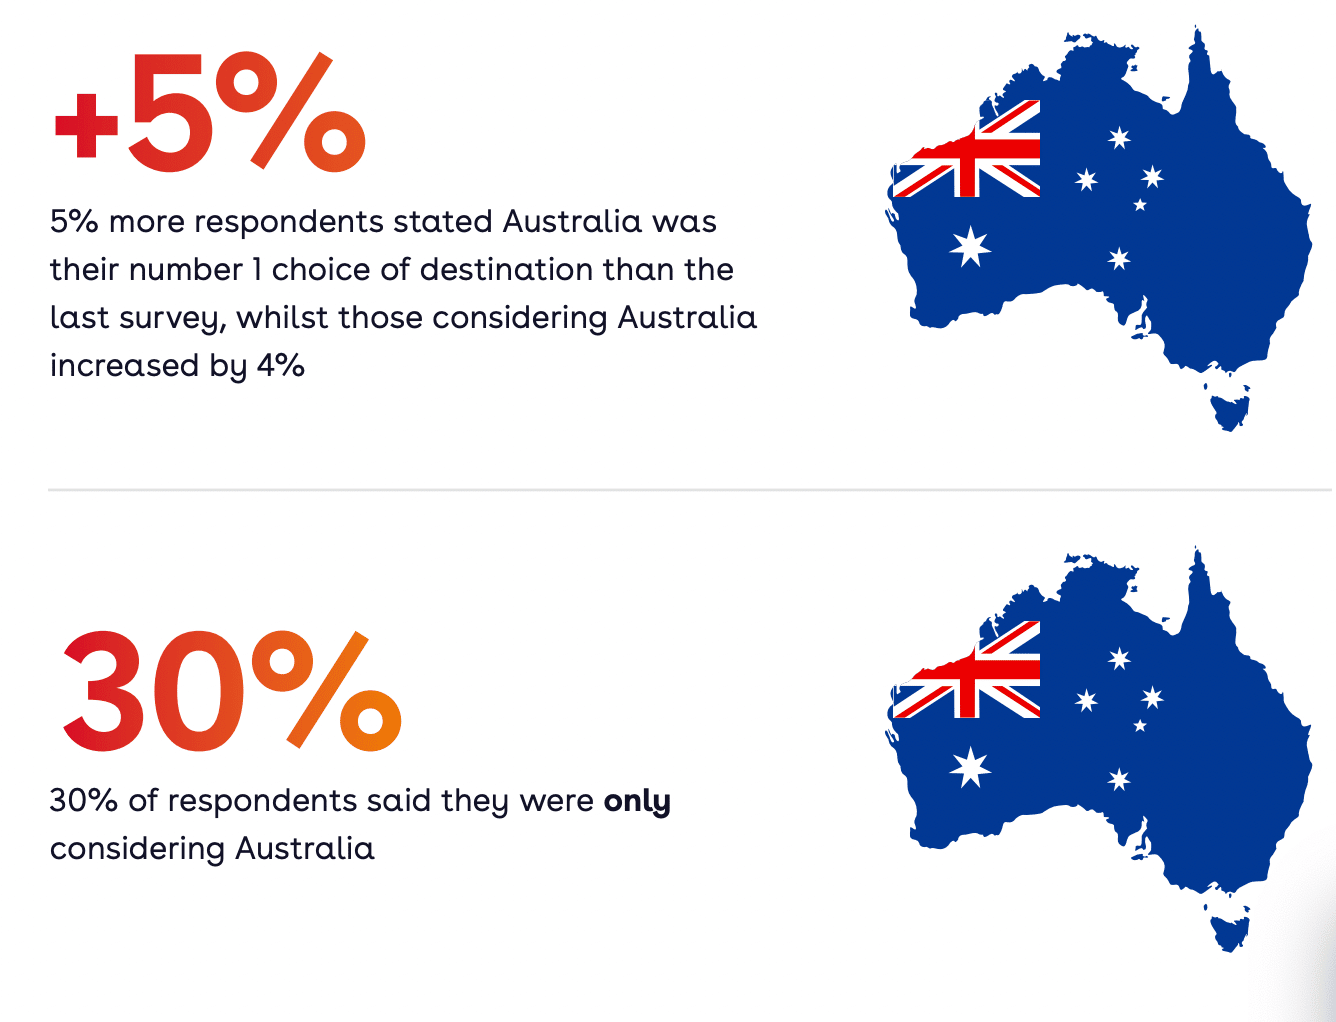 Since March 2022, the research shows that 1 in 4 international students are choosing Australia for study purposes, representing a 5 per cent increase in a matter of months. 

Source: Report by IDP Connect